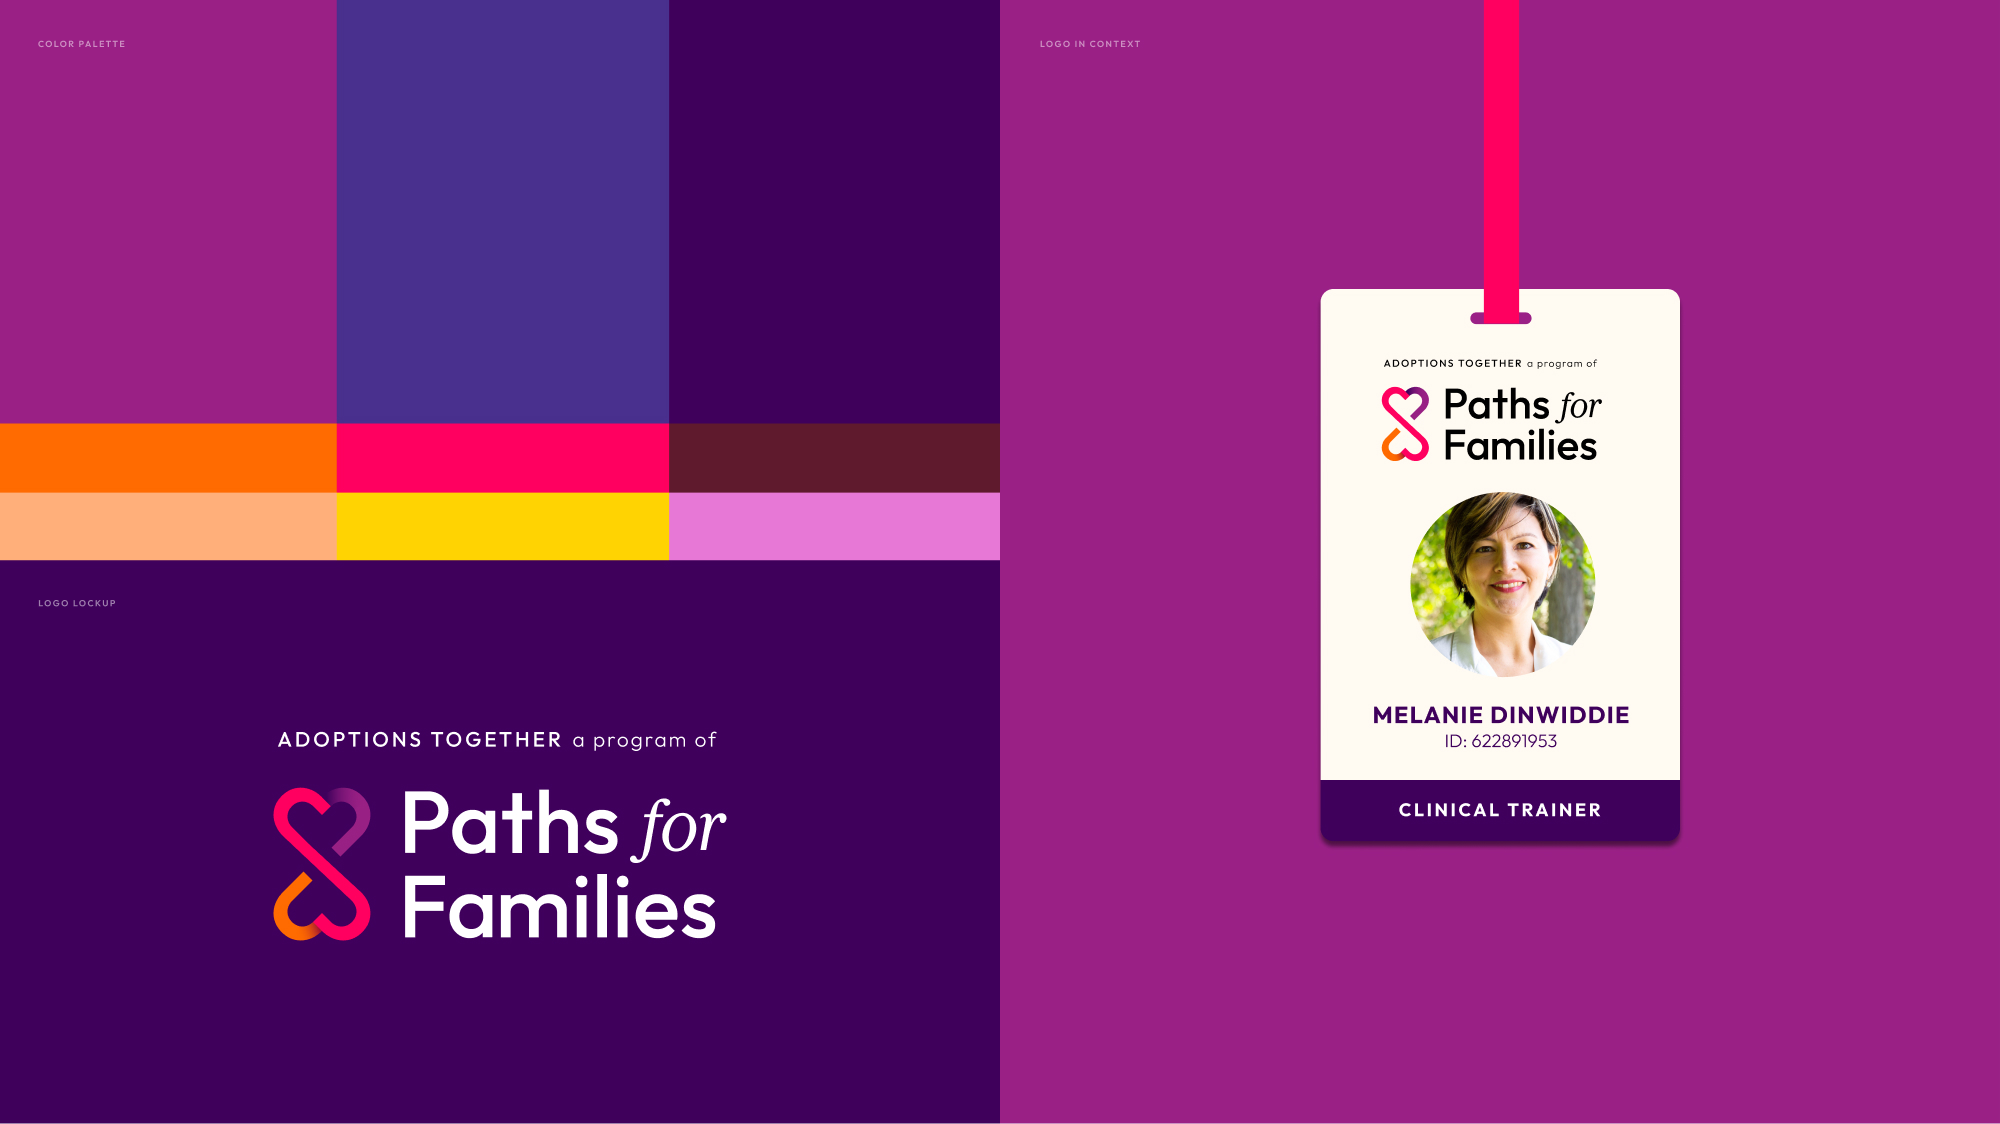 Paths for families color palette primarily featuring shades of purple, with an employee lanyard badge design on the right.